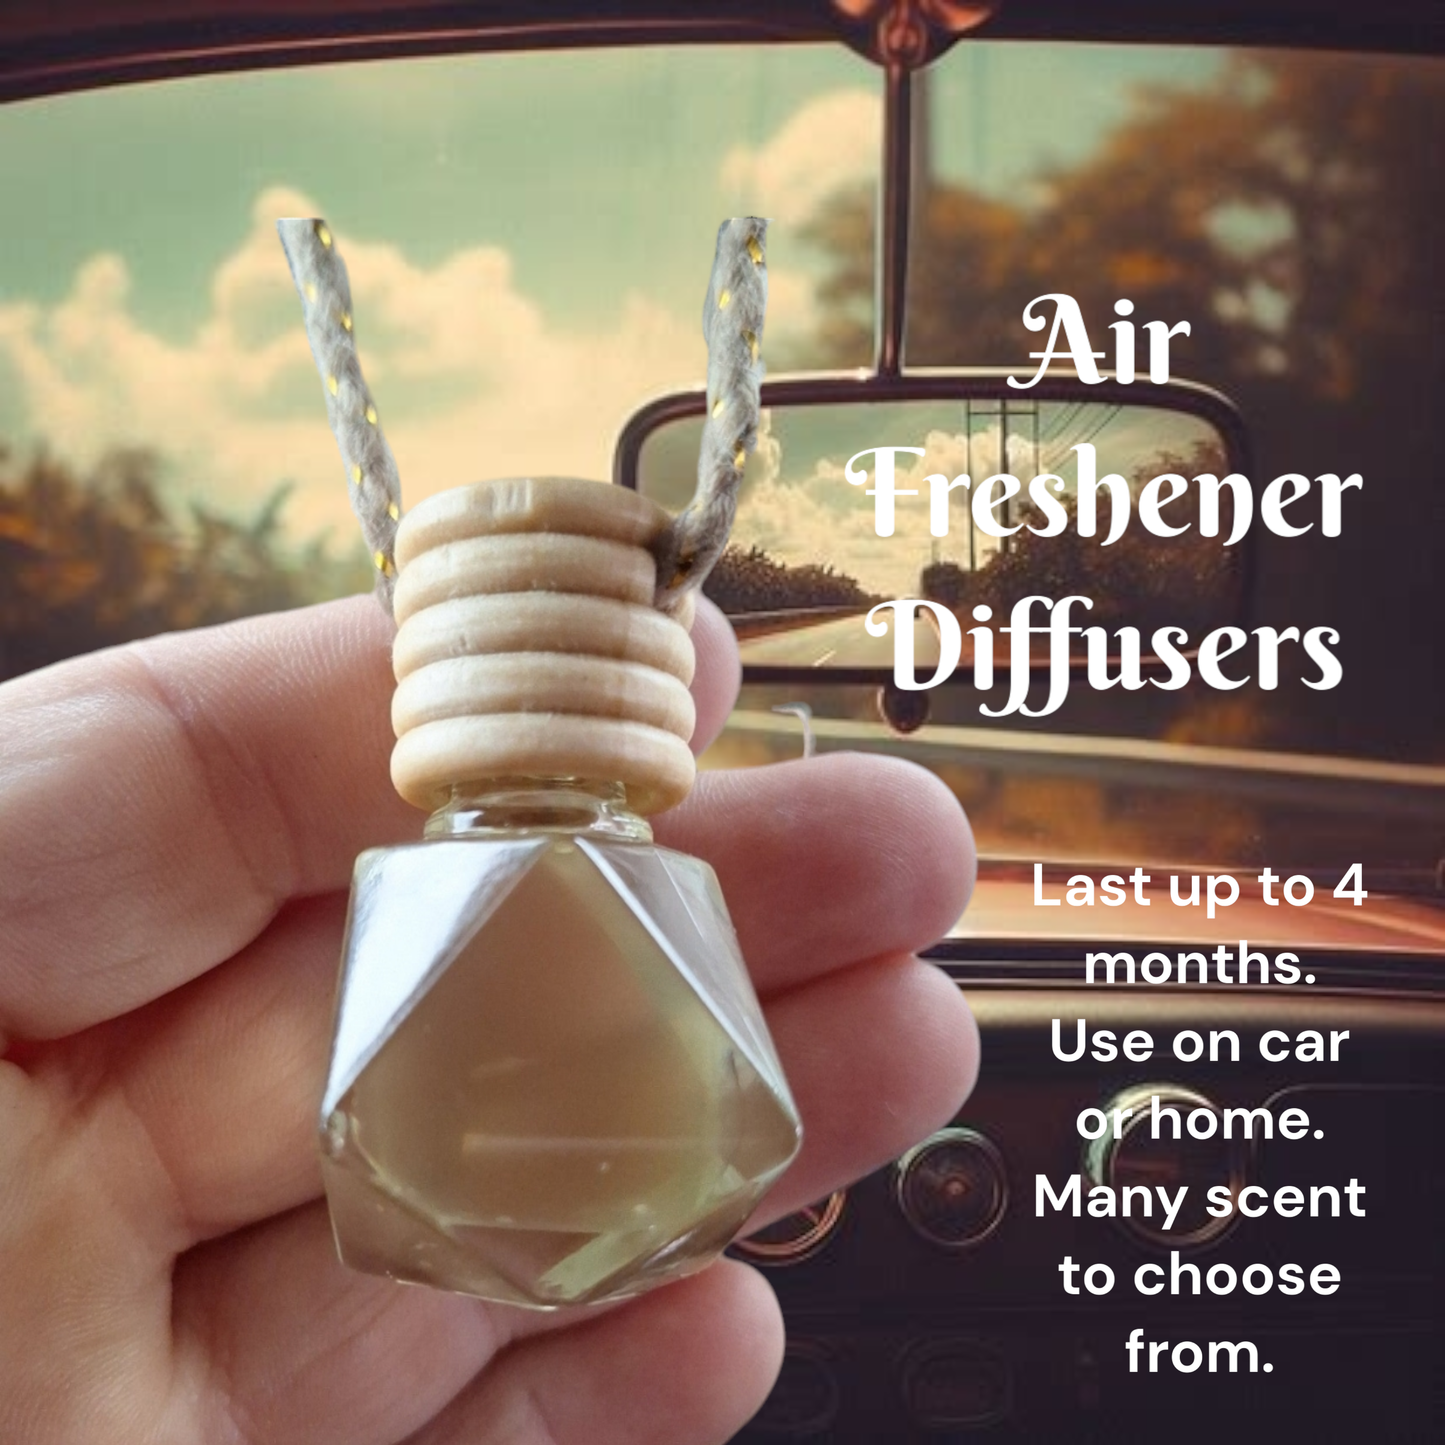 Cinnamon Apple Pie Air Freshener Diffuser for your car or home.